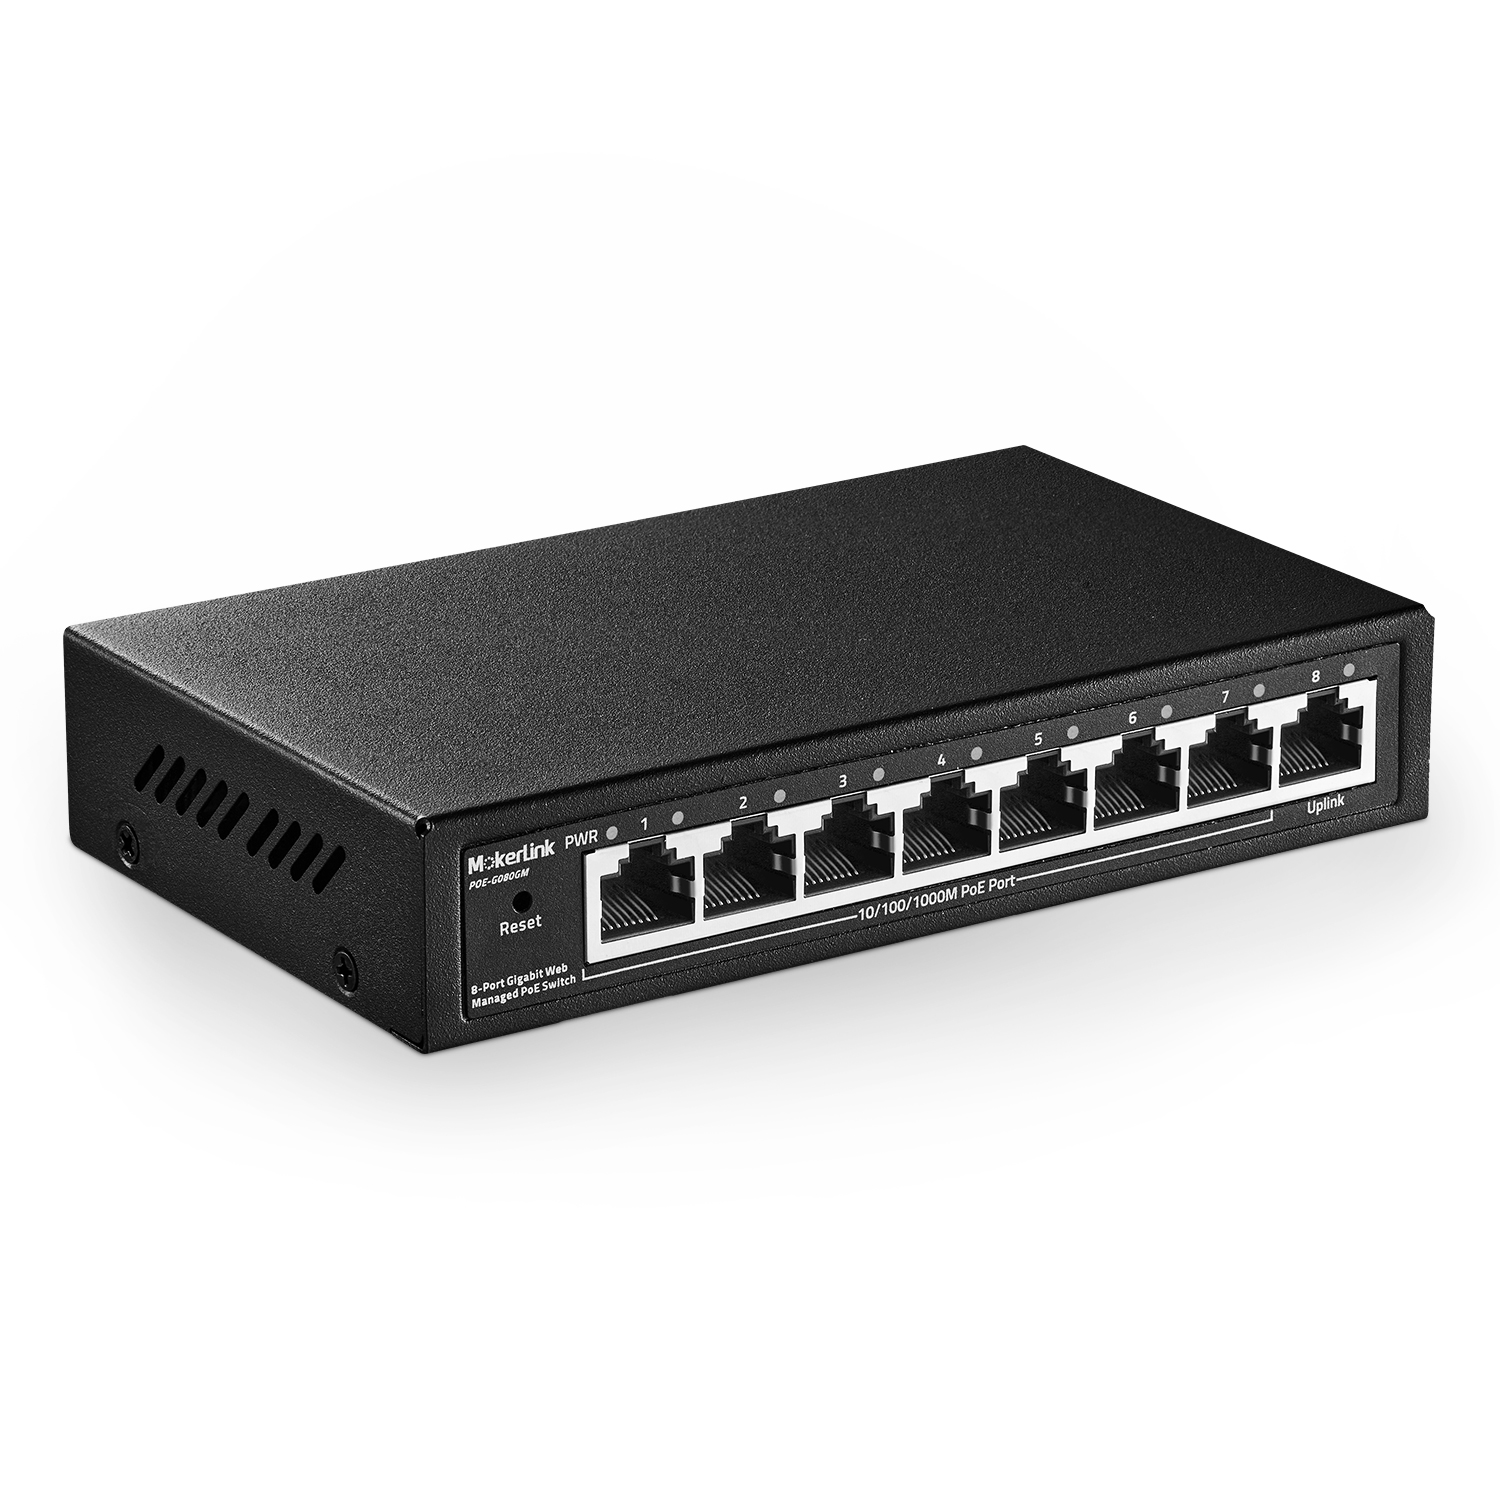 MokerLink 8 Port PoE Switch with 6 PoE+ Port, 2 Uplink, 100Mbps, 78W AI  Detection IEEE802.3af/at, Fanless Metal Plug & Play Network Switch